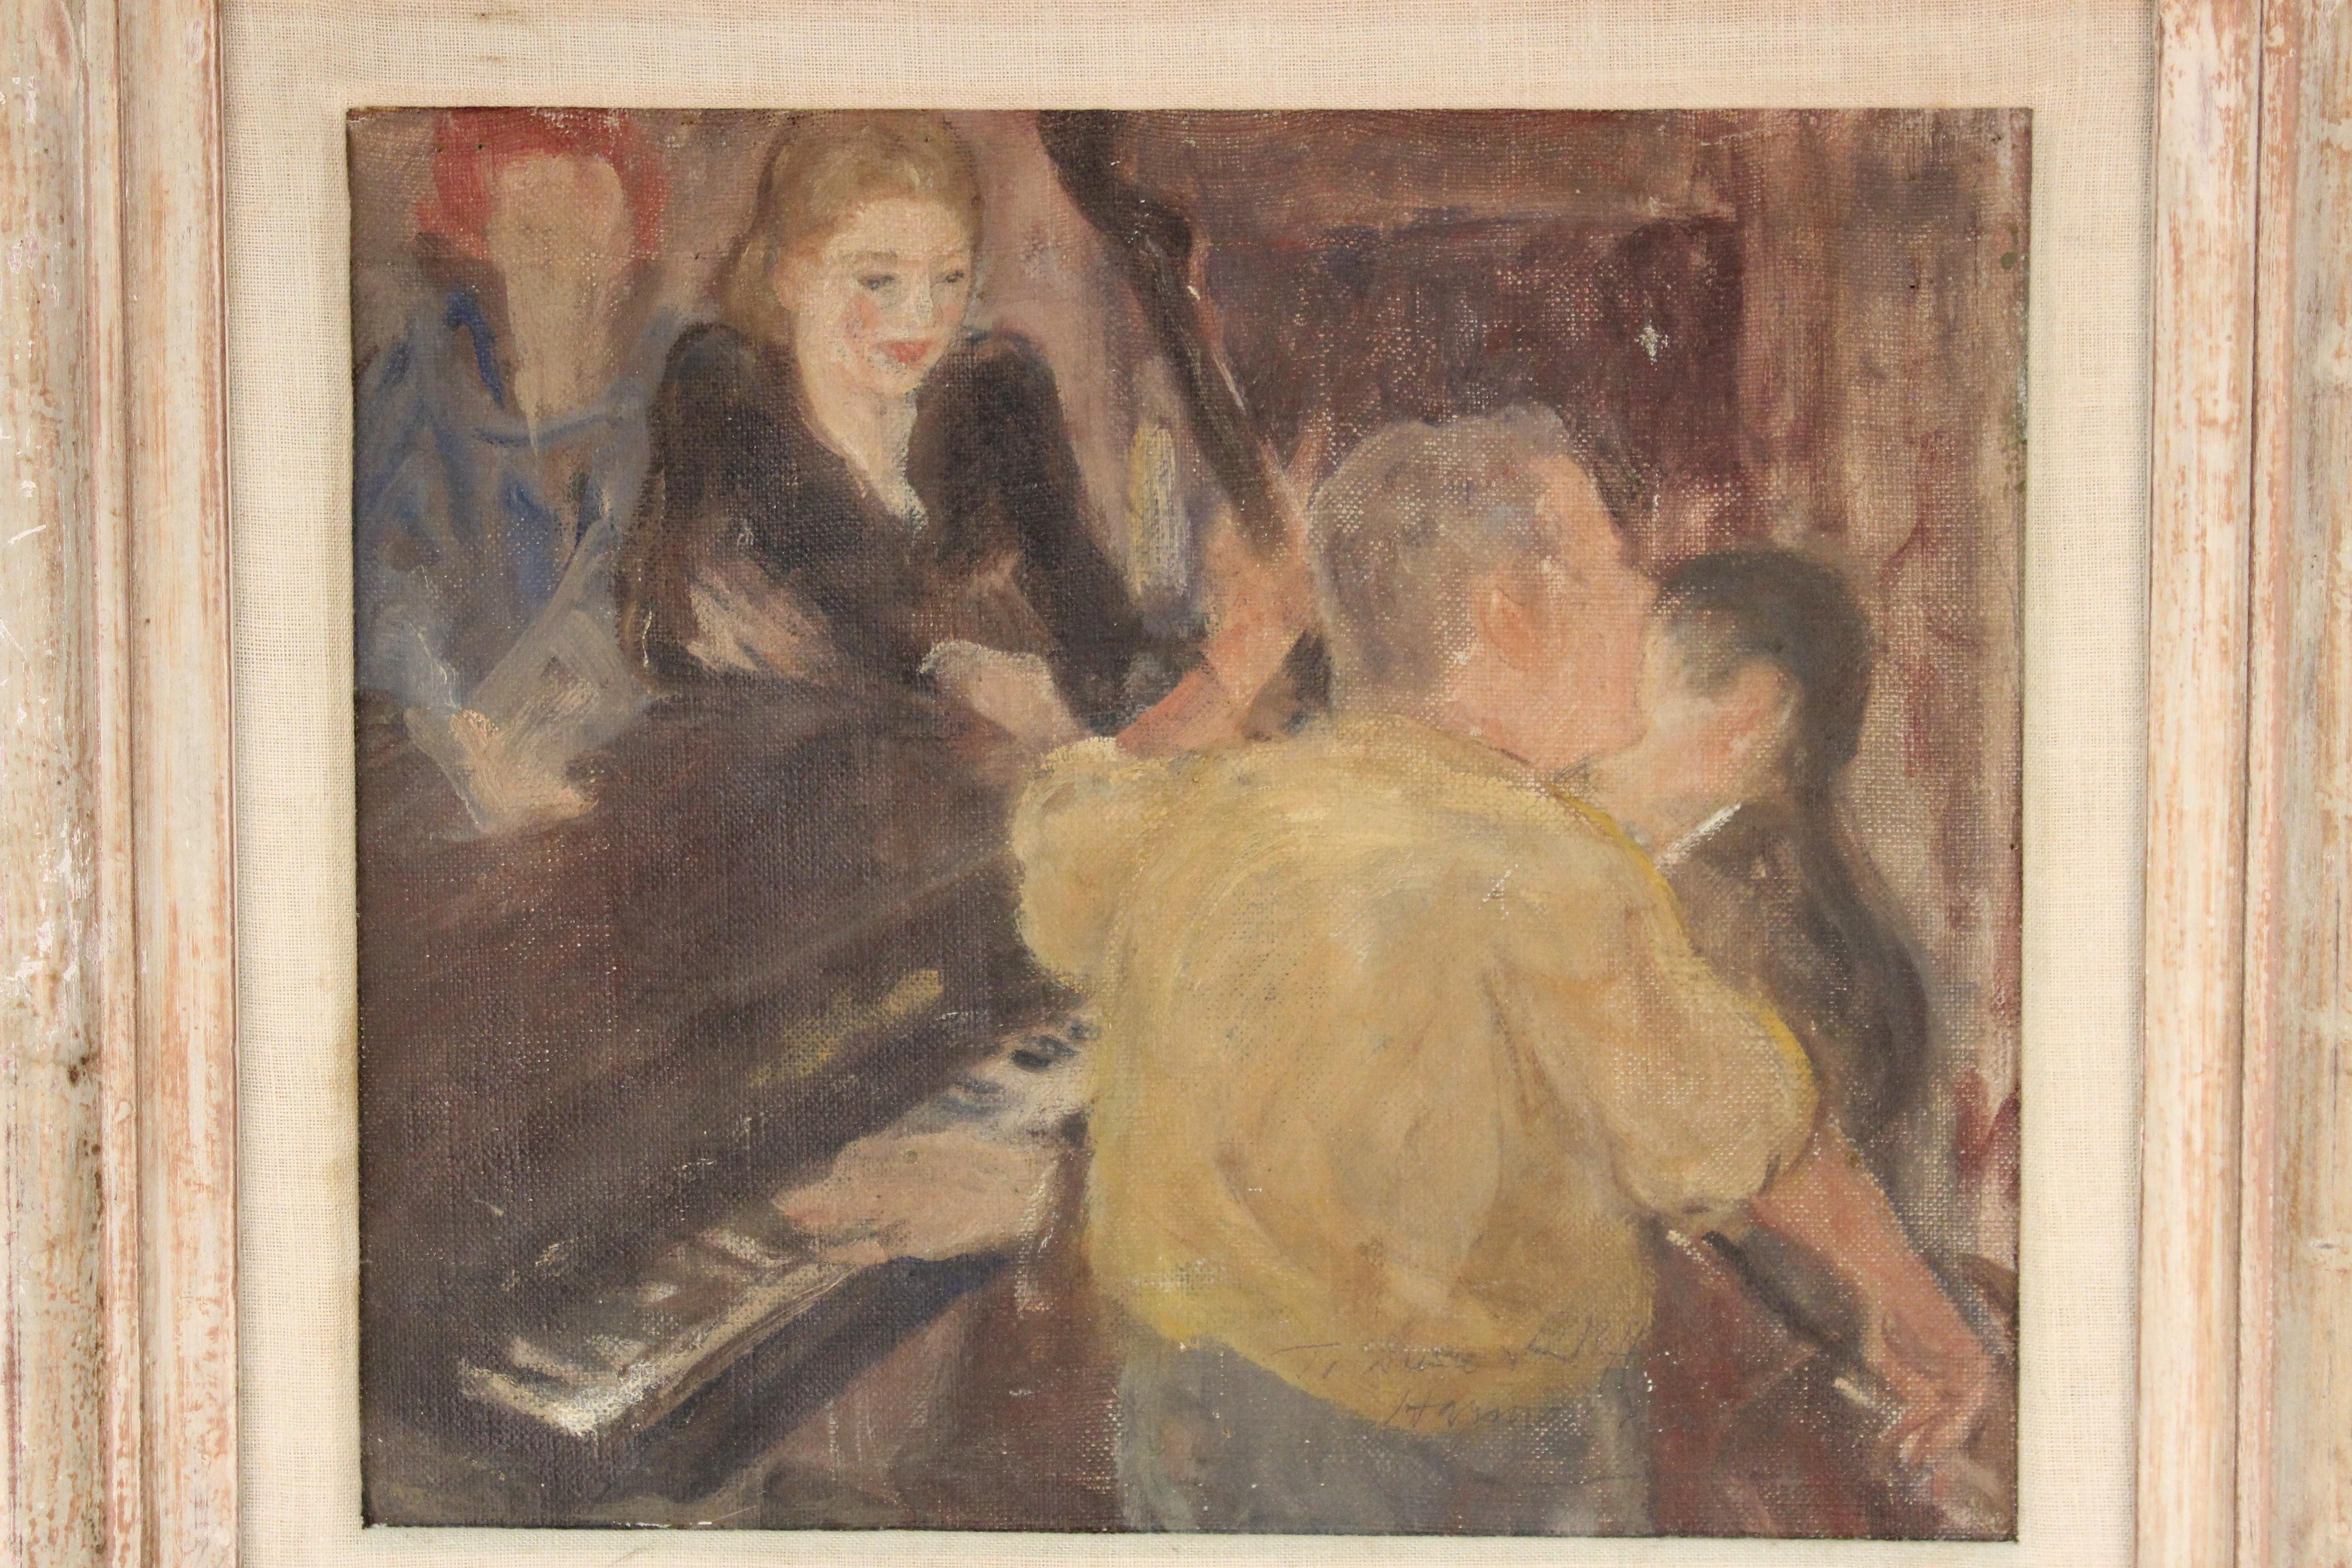 Modern genre framed oil on canvas painting of a jazz singer with musicians at a piano and an upright bass player. The piece is inscribed 'To Susie' and signed illegibly (Harmon N..?) in graphite on the lower right corner. In good vintage condition.